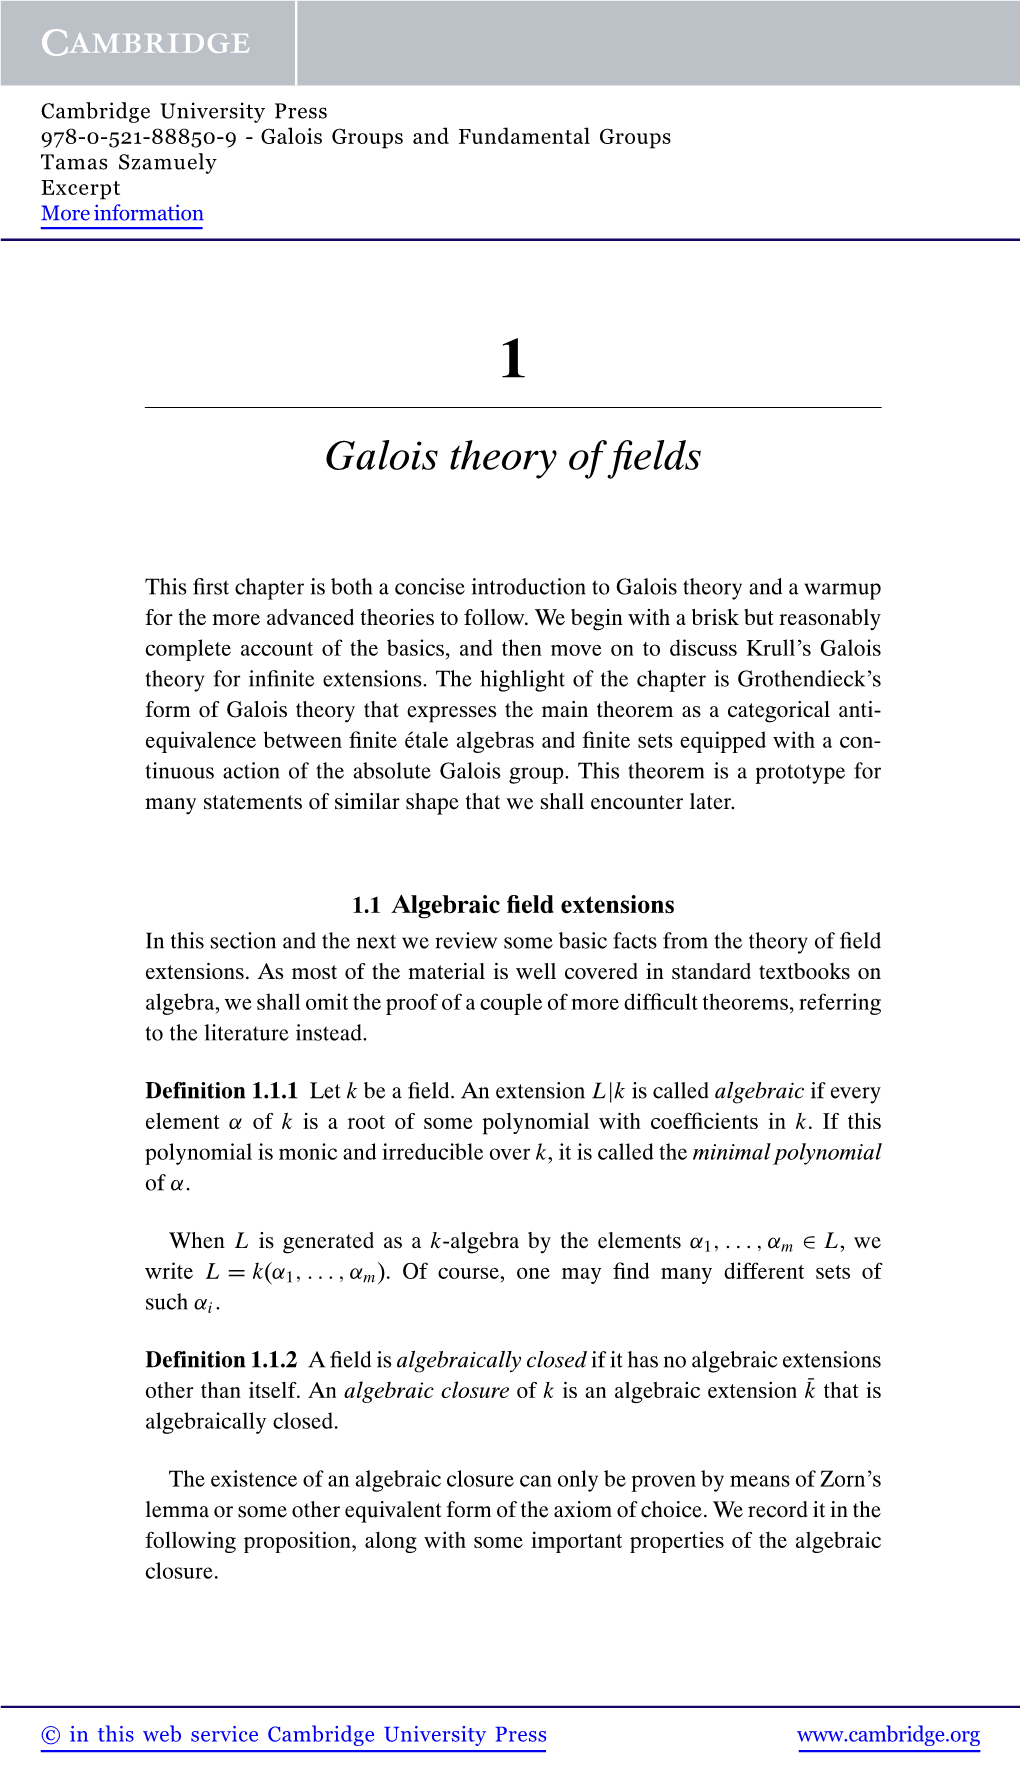 Galois Theory of Fields